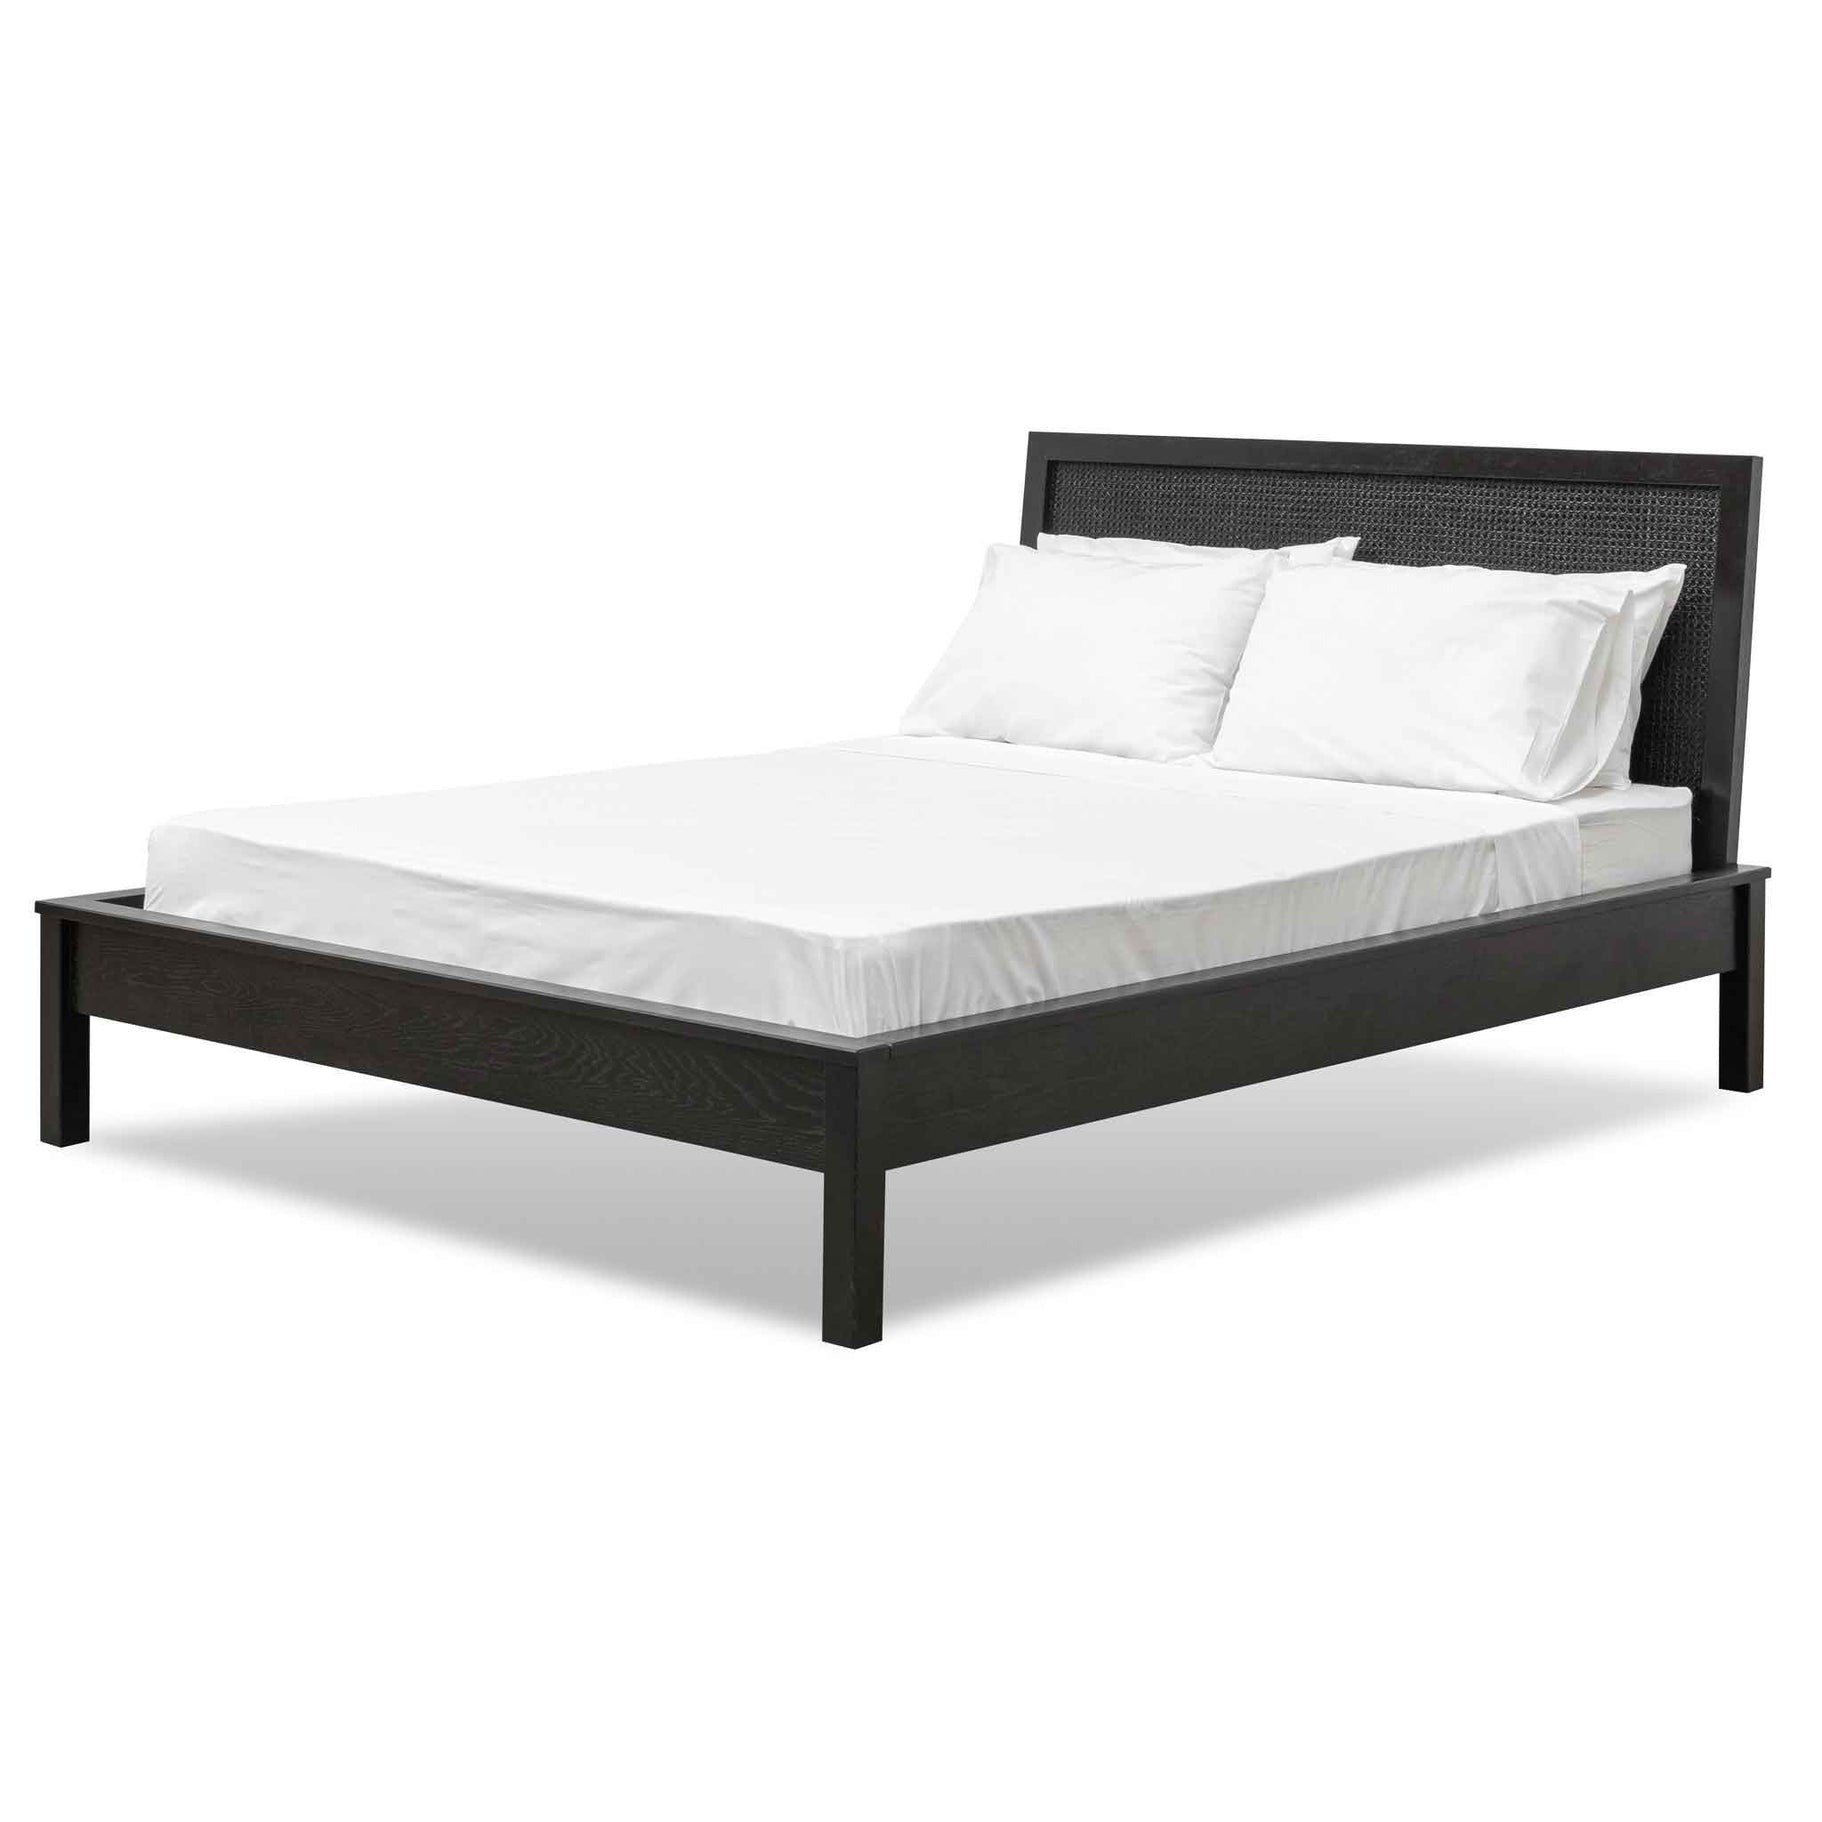 Molina Wooden Queen Sized Bed Frame - Black